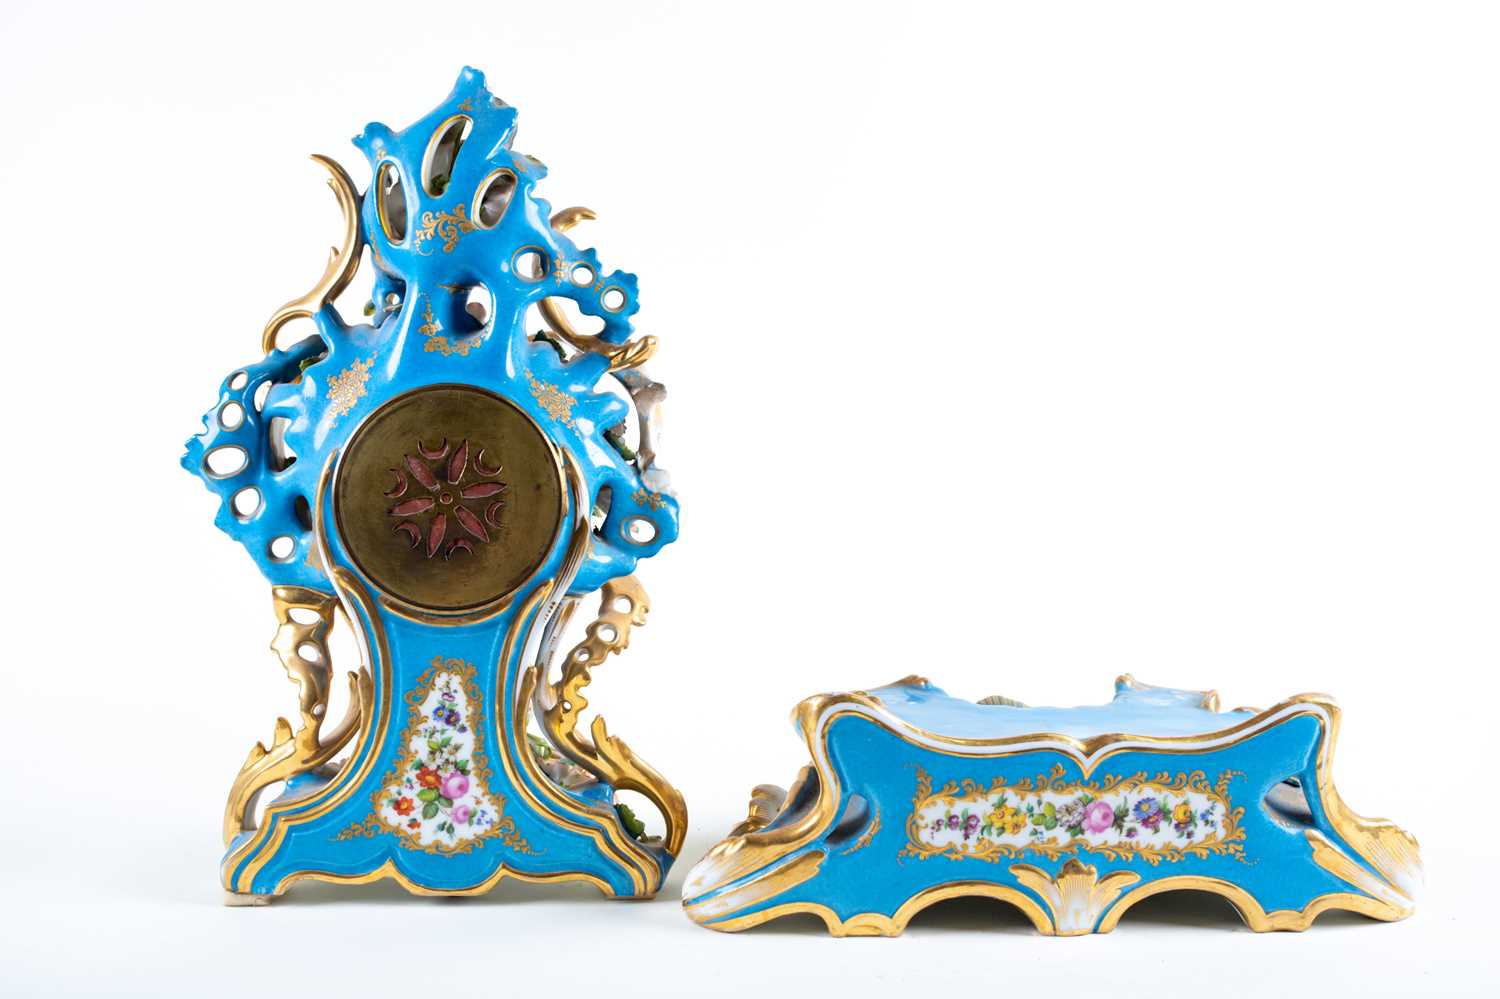 A 19th-century French porcelain chiming mantle clock on conforming stand, in the Sevres style with - Image 2 of 9